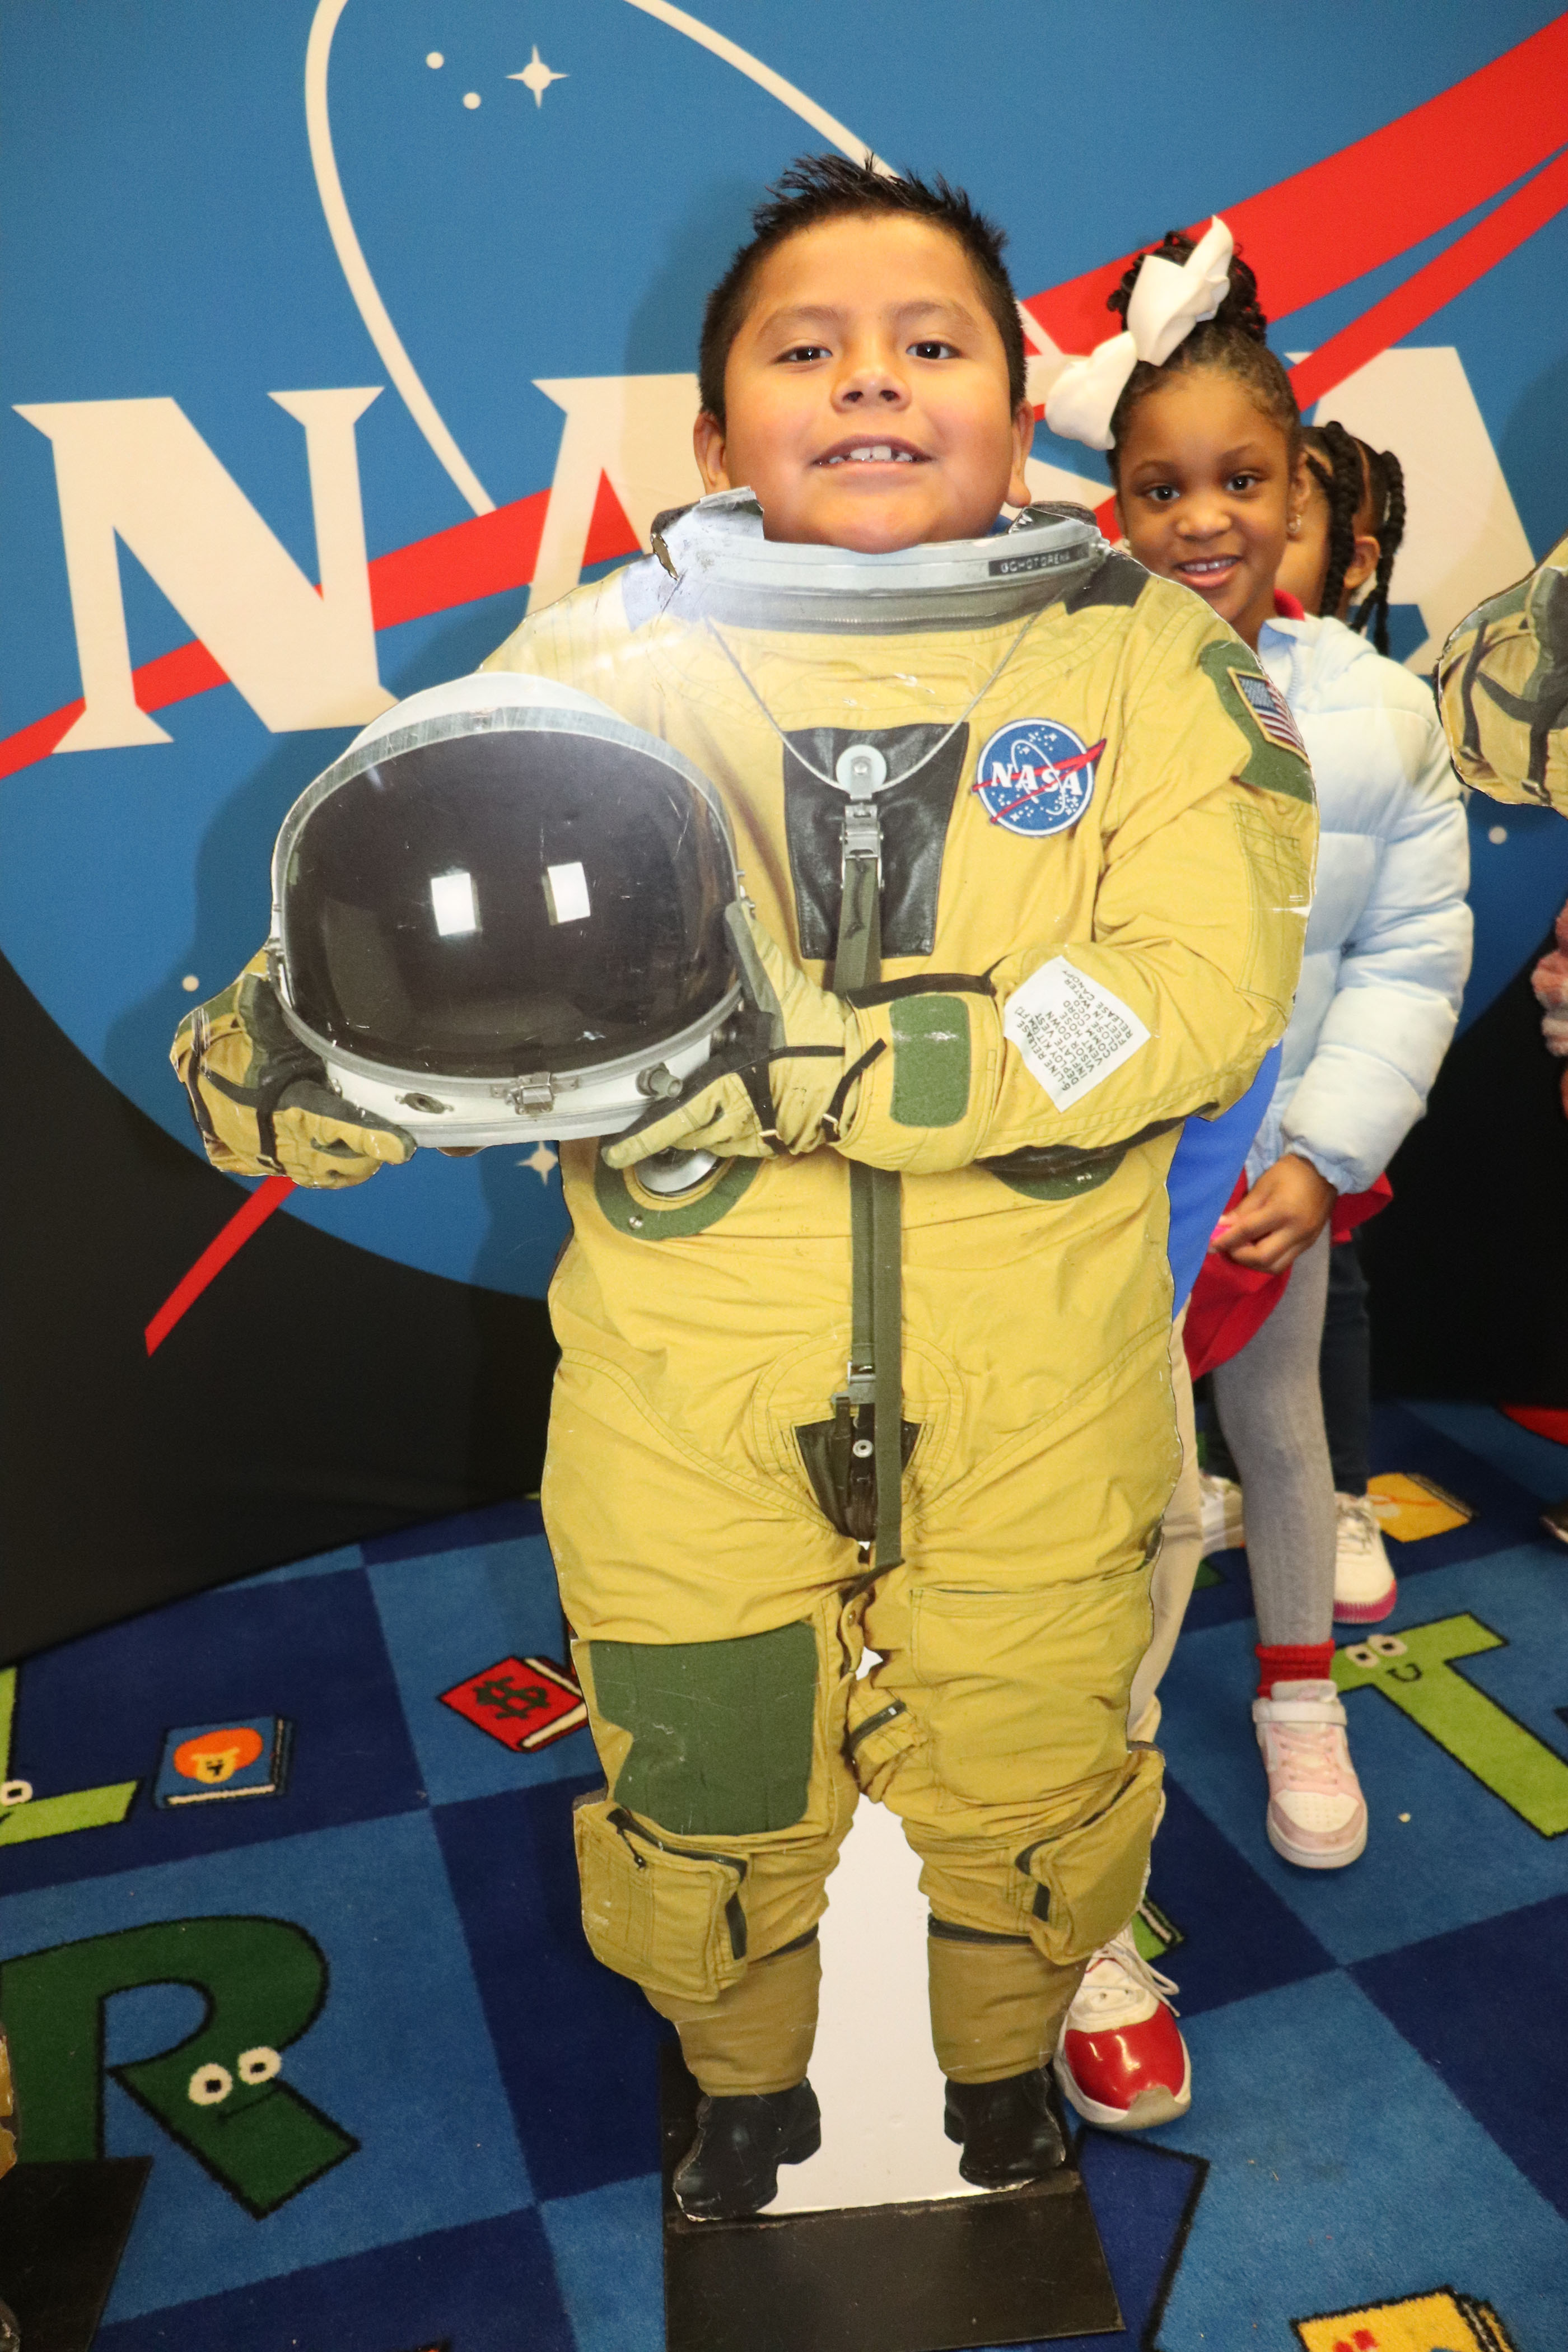 young student poses behind astronaut cutout